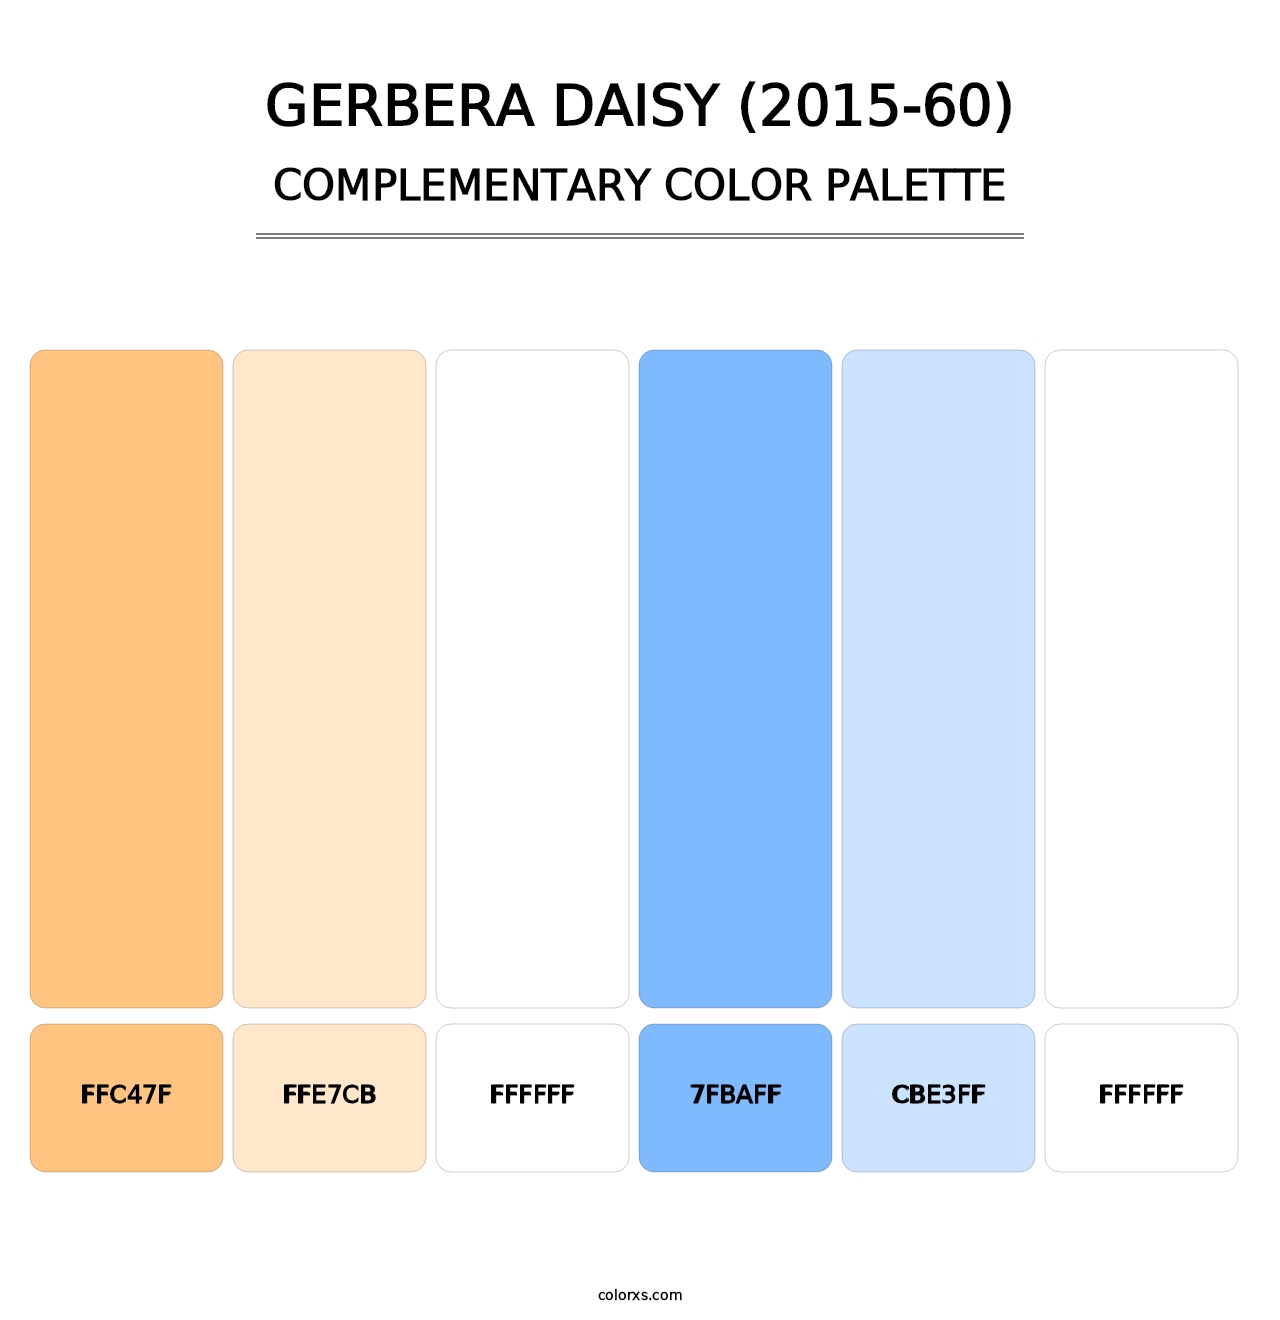 Gerbera Daisy (2015-60) - Complementary Color Palette